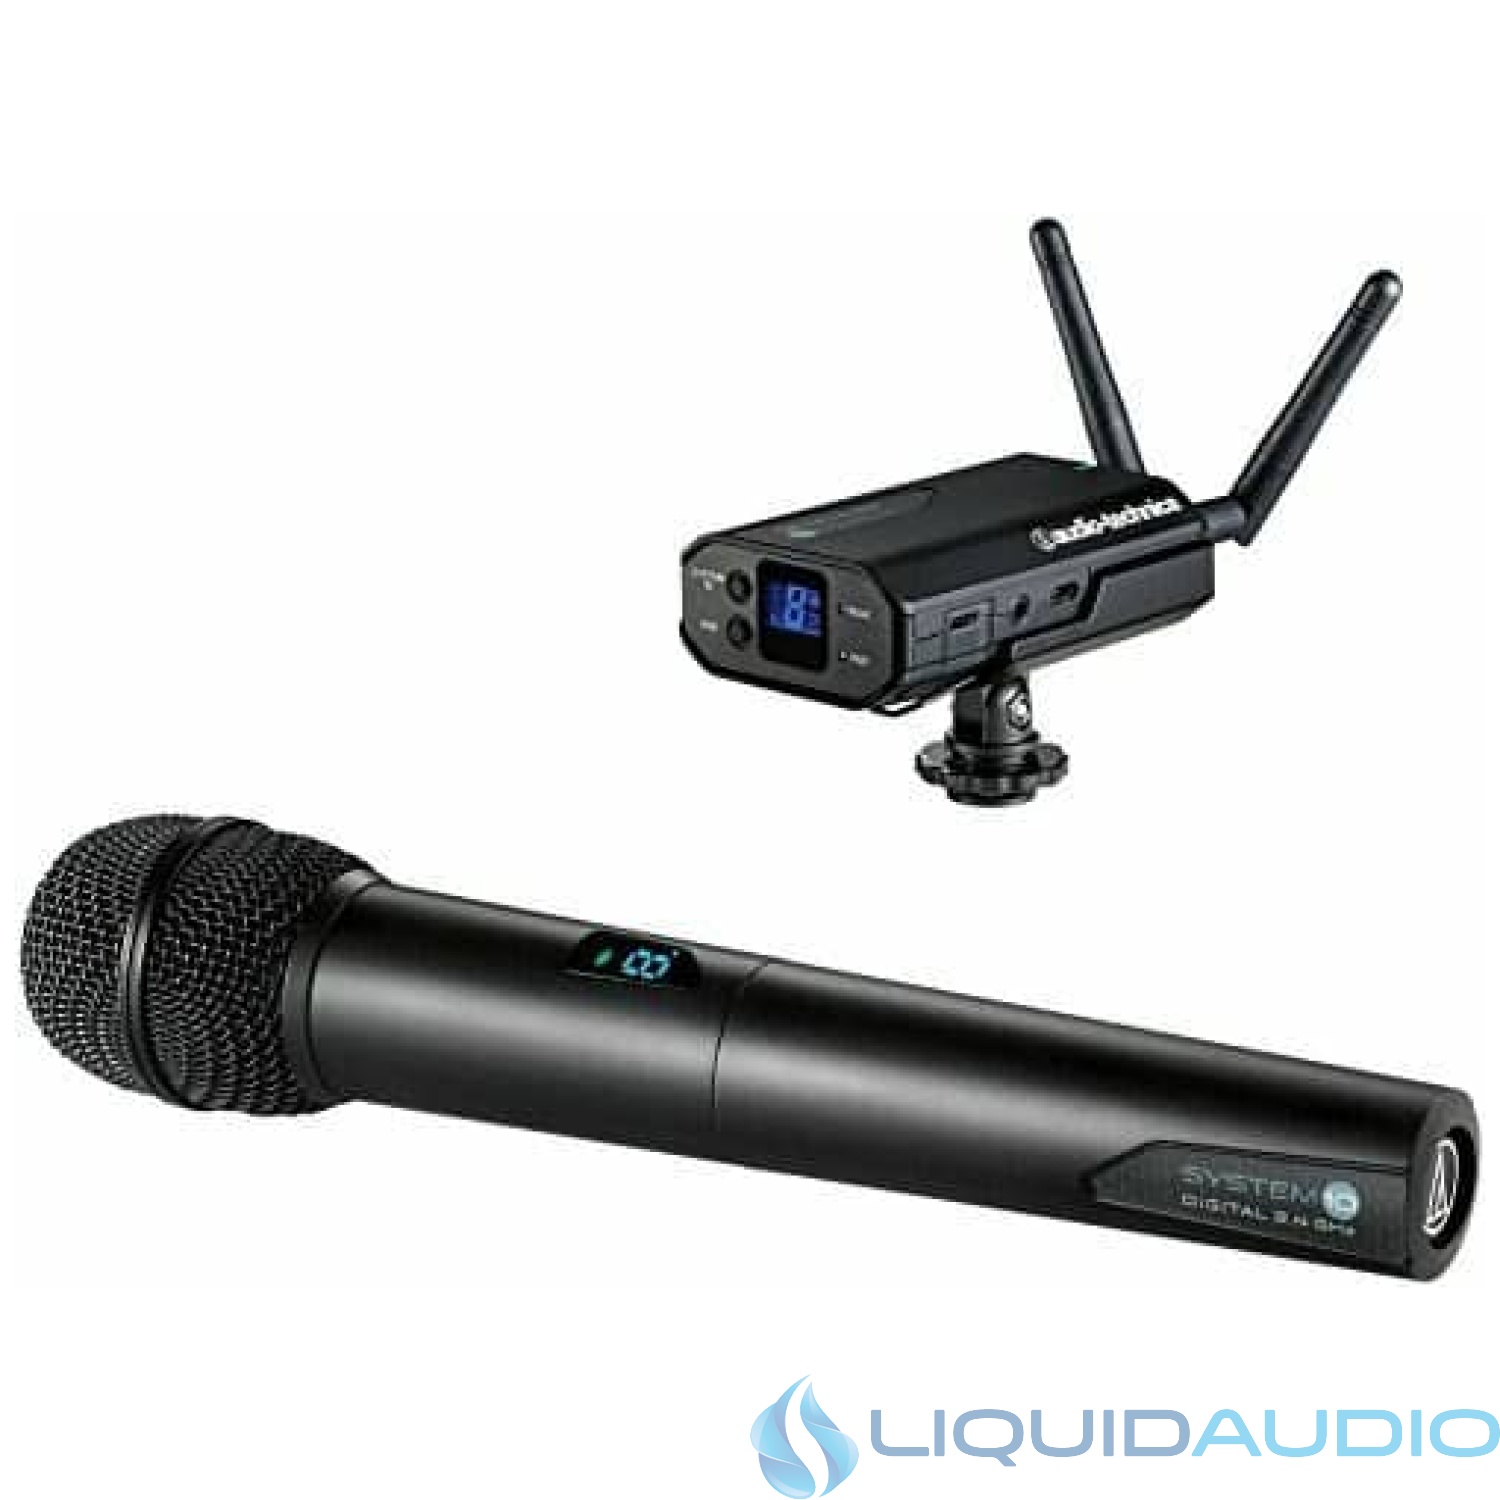 Audio-Technica System 10 - Camera-Mount Digital Wireless Microphone System with